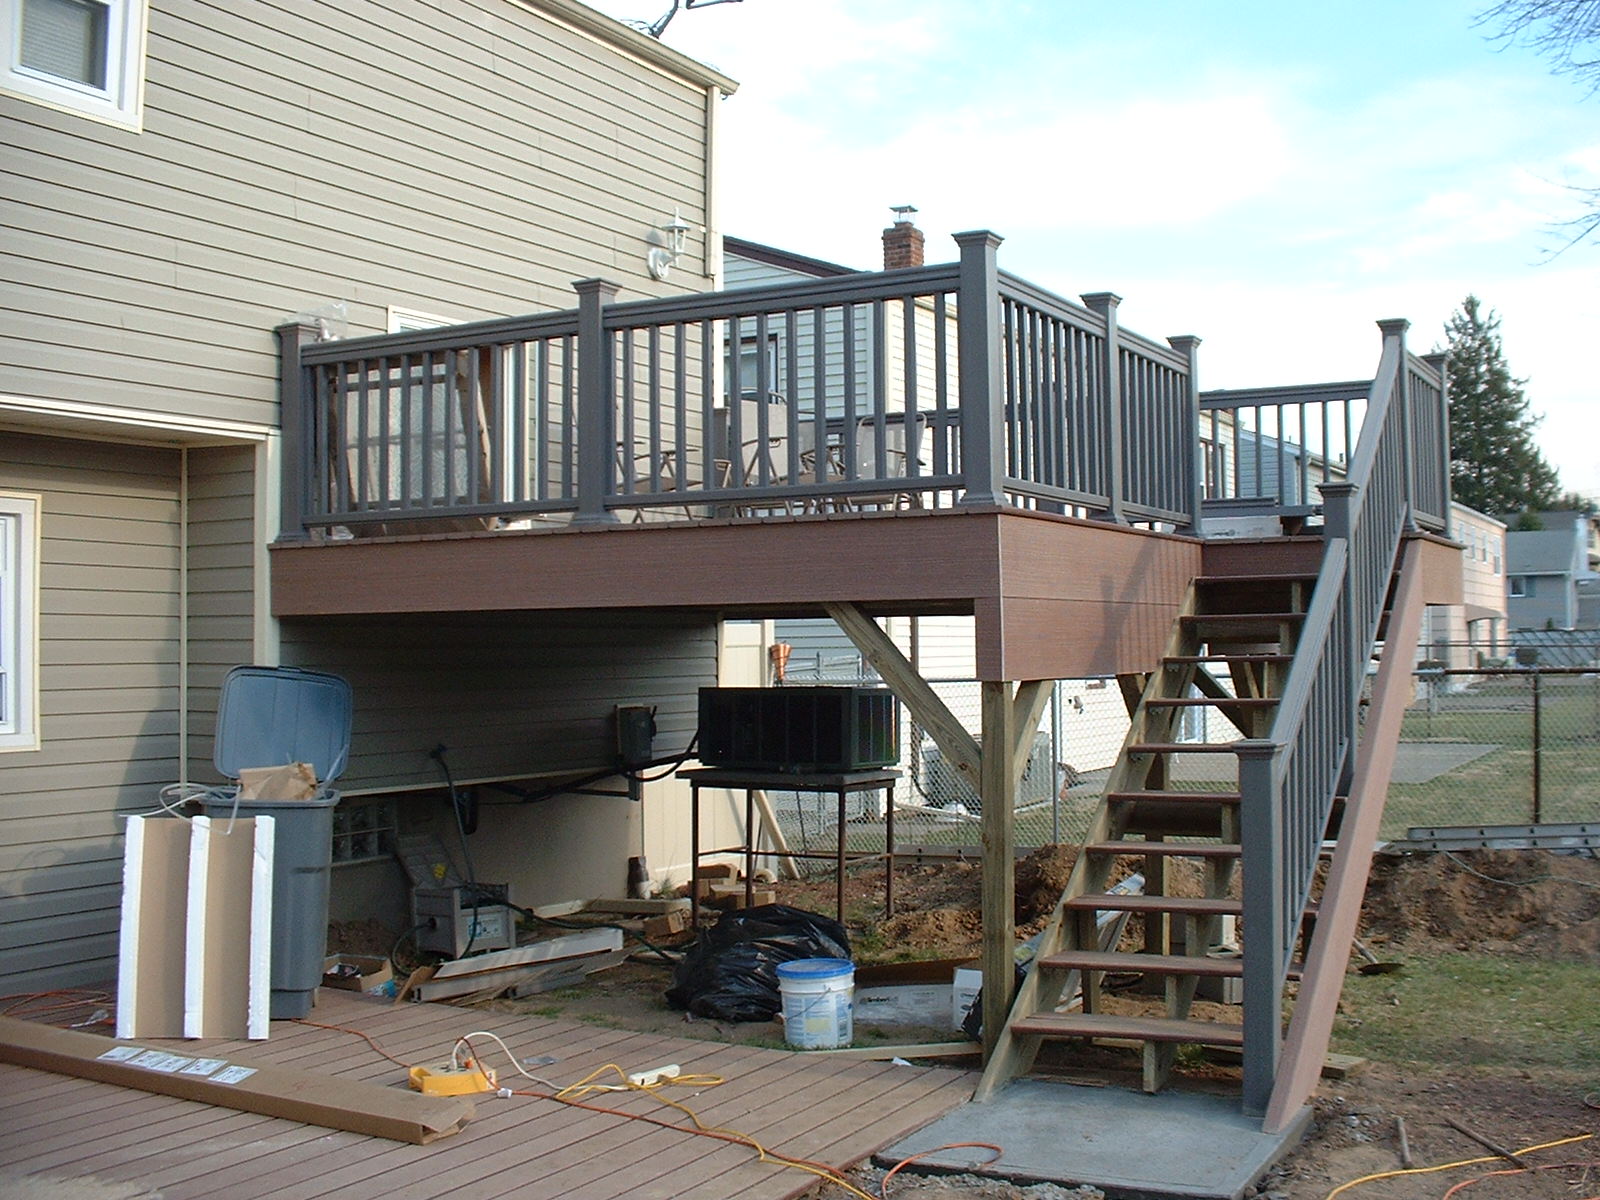 Both decks are now finished and a concrete pad is poured for the bottom of the stairs.